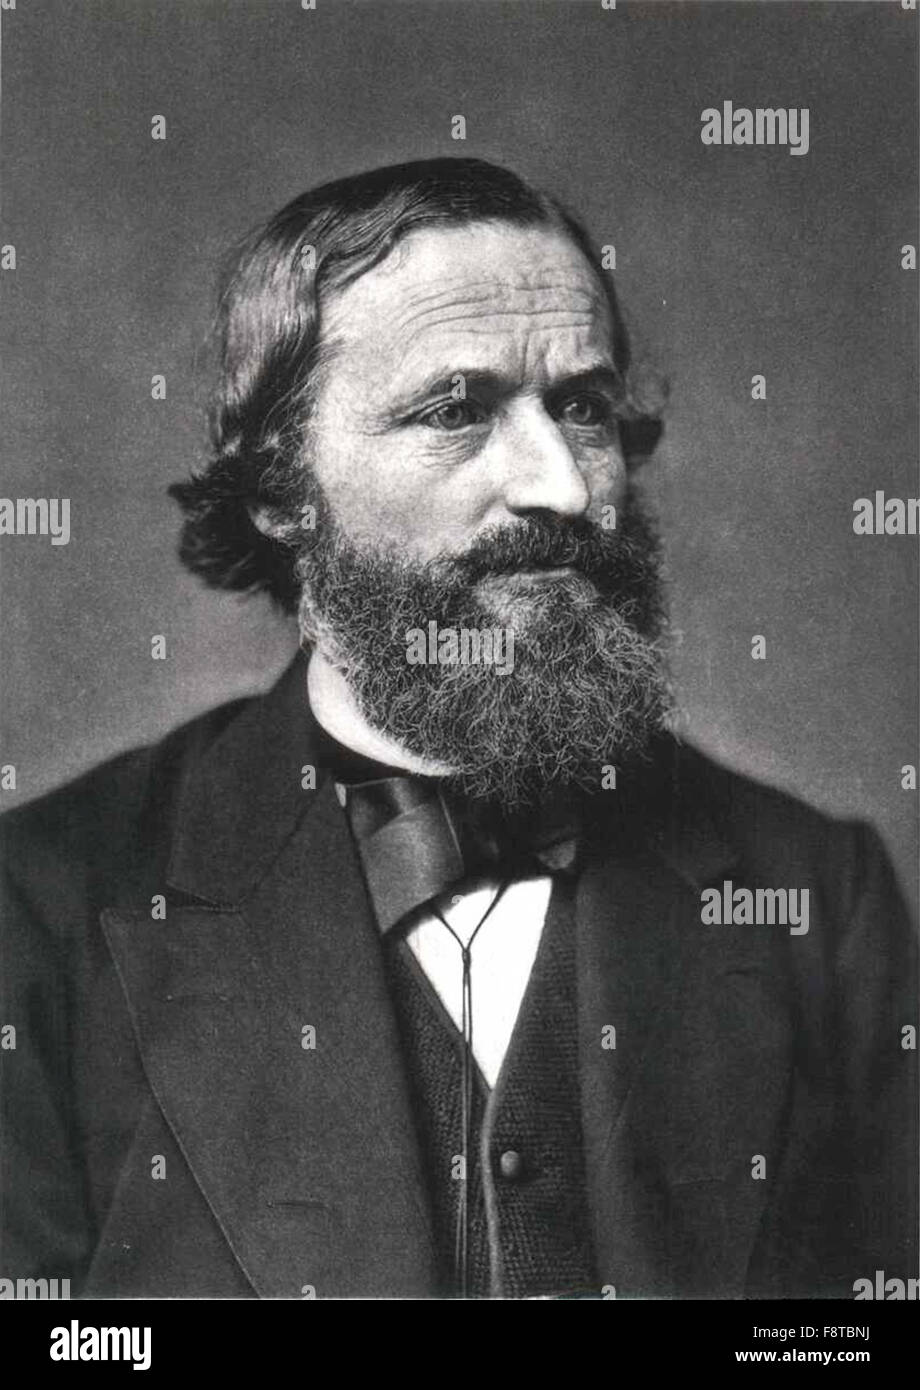 Gustav Robert Kirchhoff, German physicist who contributed to the fundamental understanding of electrical circuits, spectroscopy, and the emission of black-body radiation by heated objects.  He coined the term 'black body' radiation in 1862, and two different sets of concepts (one in circuit theory, and one in spectroscopy) are named 'Kirchhoff's laws' after him; there is also a Kirchhoff's Law in thermochemistry. The Bunsen–Kirchhoff Award for spectroscopy is named after him and his colleague, Robert Bunsen. Stock Photo